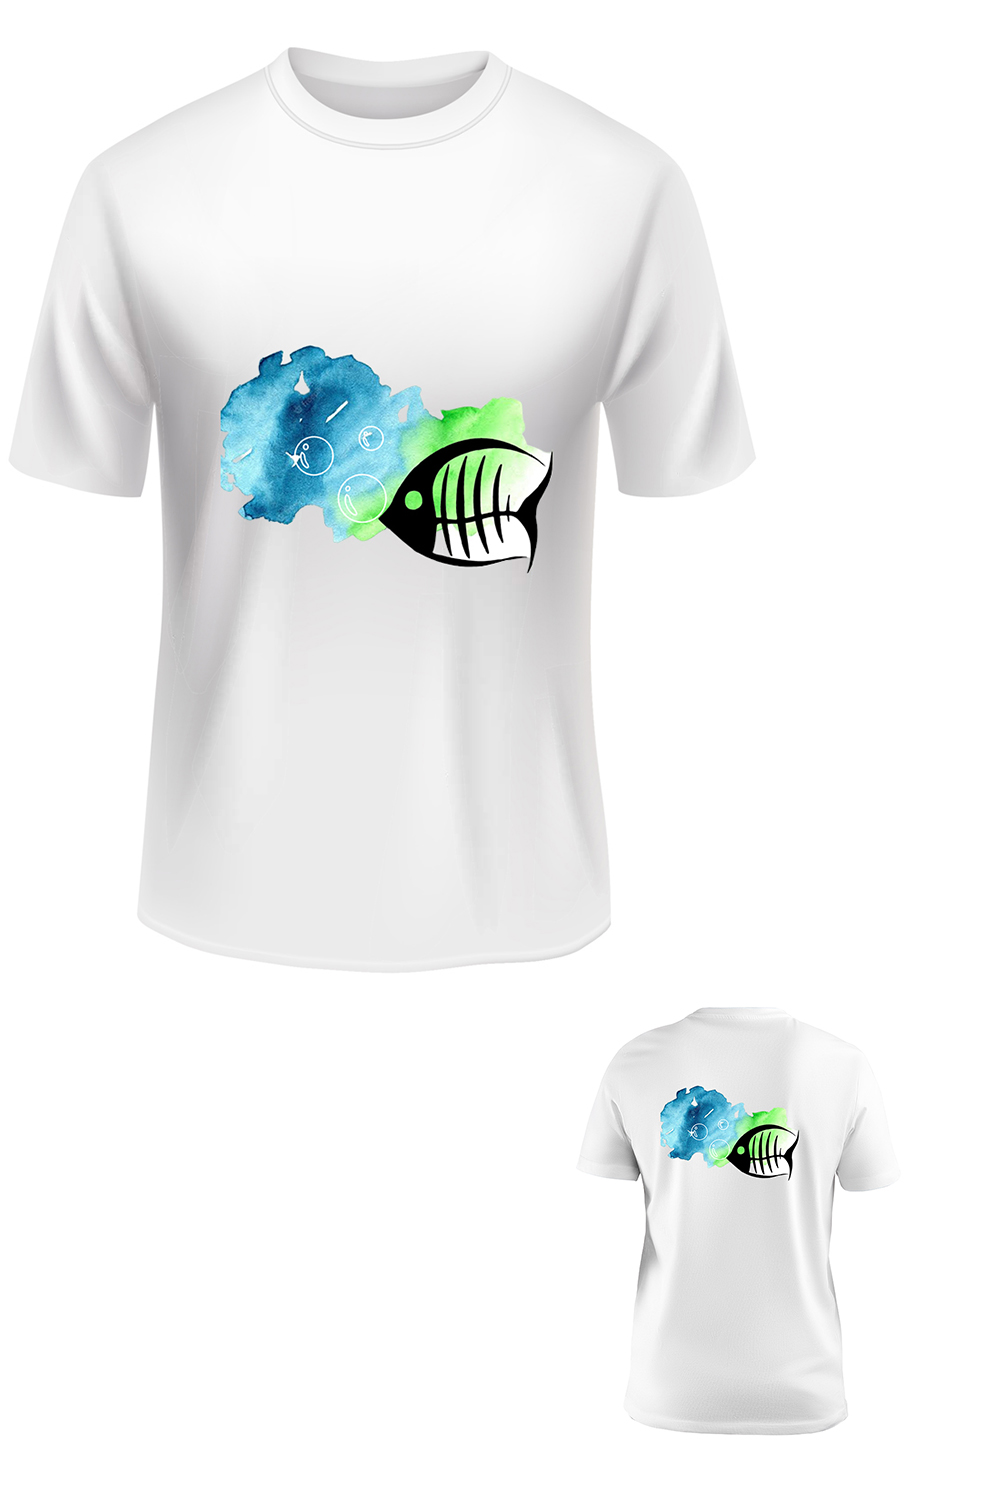 T-shirt design for printing - Fish with bubbles in the sea pinterest preview image.